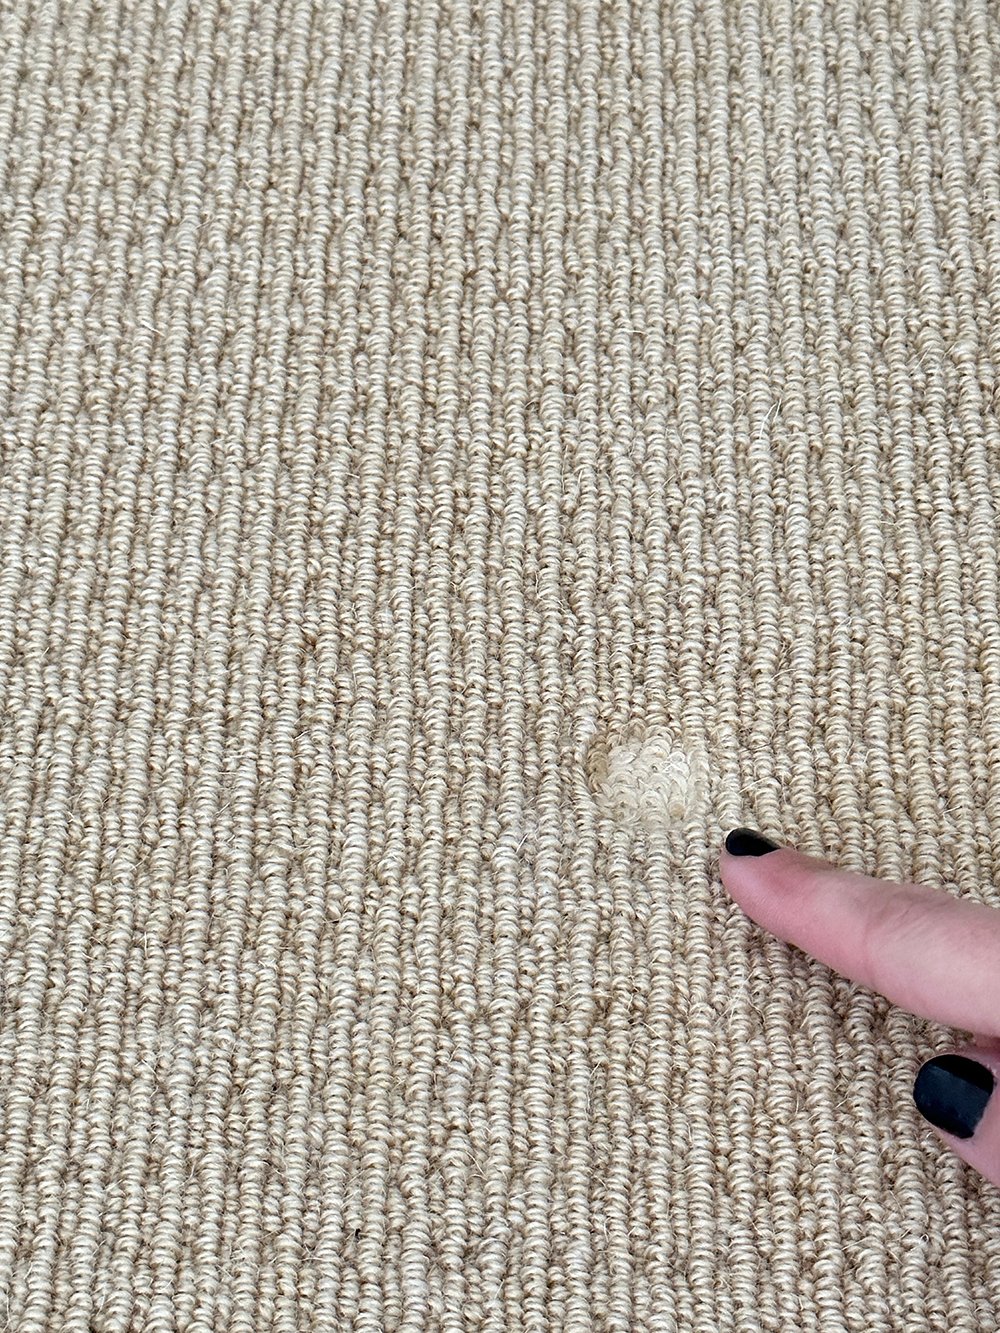 How to Remove Furniture Indentations from Carpet - roomfortuesday.com